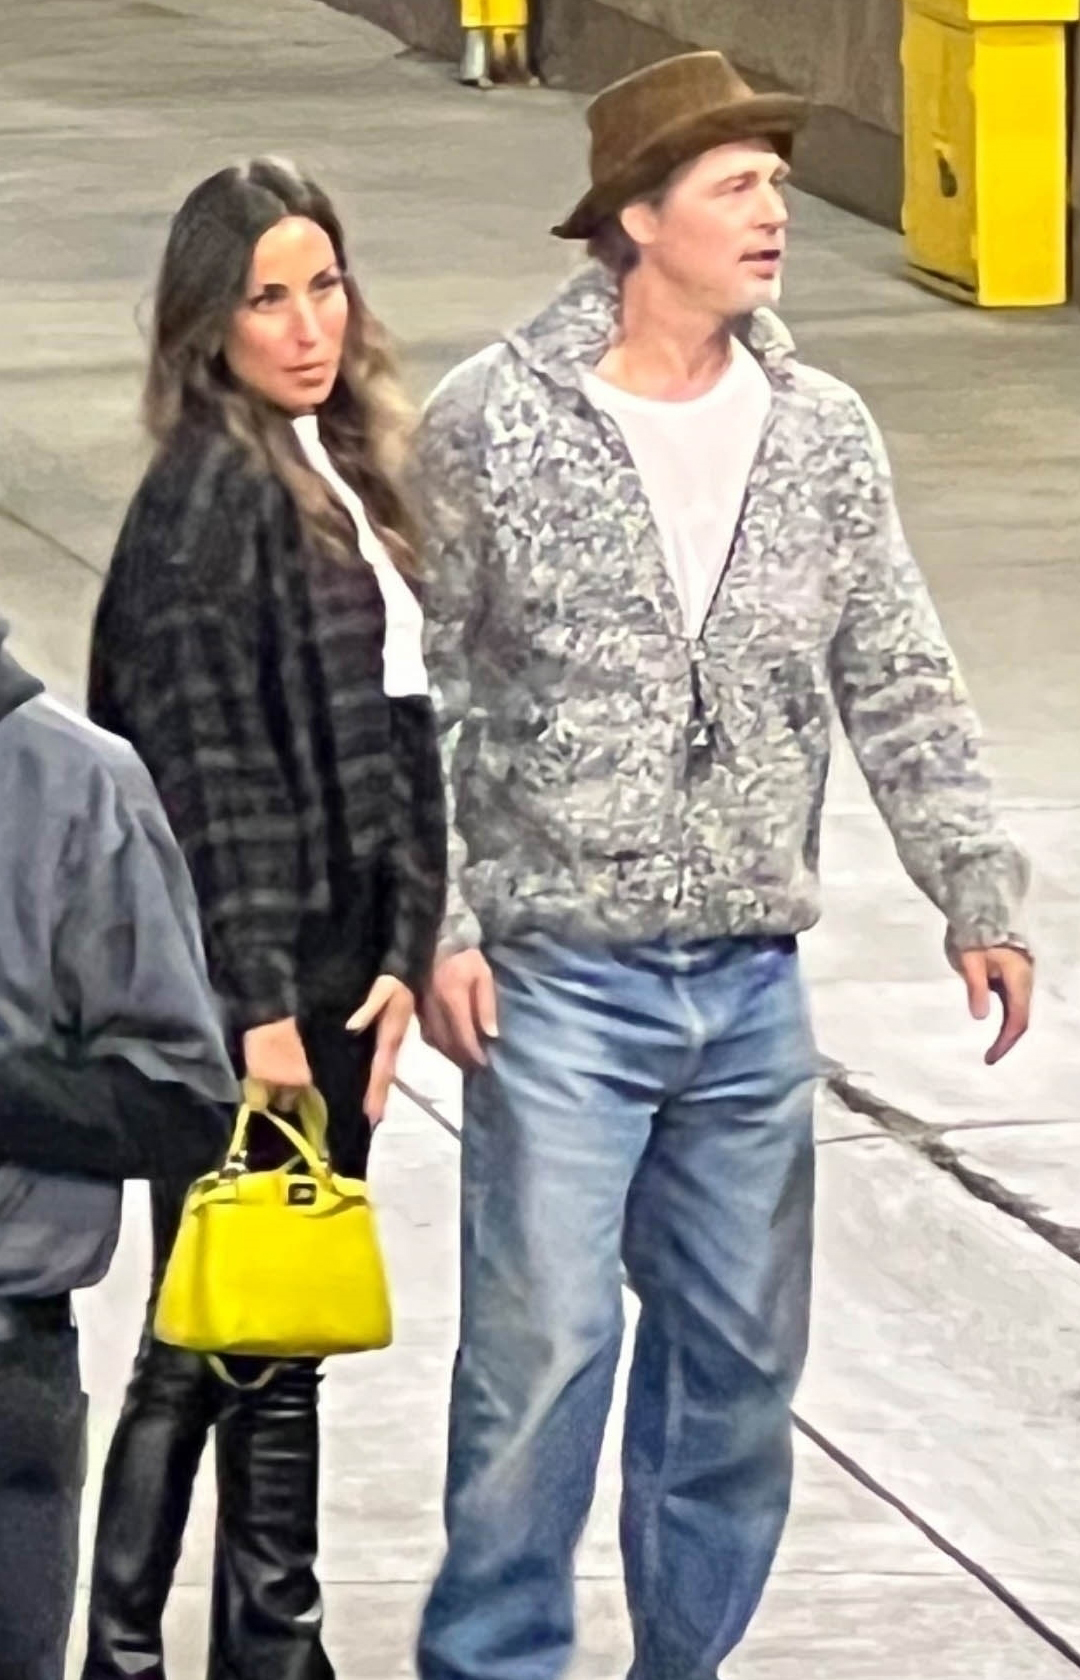 <p><span>In November 2022, a then-58-year-old <a href="https://www.wonderwall.com/celebrity/profiles/overview/brad-pitt-245.article">Brad Pitt</a> was snapped holding hands with a then-29-year-old Ines de Ramon -- who'd </span><a href="https://www.wonderwall.com/celebrity/couples/celebrity-breakups-splits-of-2022-famous-couples-divorce-549565.gallery?photoId=652885">just split</a><span> from </span><a href="https://www.wonderwall.com/celebrity/couples/celebrity-weddings-2019-stars-who-got-married-3019198.gallery?photoId=1047704">her husband of three years</a><span>, "The Vampire Diaries" alum Paul Wesley, a few months earlier -- while catching Bono's "Surrender" tour stop at the Orpheum Theatre in Los Angeles. According to a </span><a href="https://people.com/movies/brad-pitt-ines-de-ramon-have-been-dating-for-a-few-months-exclusive/">People</a><span> magazine source, the A-list actor and the Switzerland-educated jewelry professional -- who's 27 years his junior -- had been quietly "</span><a href="https://www.wonderwall.com/celebrity/couples/gisele-bundchen-new-boyfriend-celeb-love-news-hollywood-romance-report-november-2022-670465.gallery?photoId=670746">dating for a few months</a><span>" after meeting through "a mutual friend." </span></p>